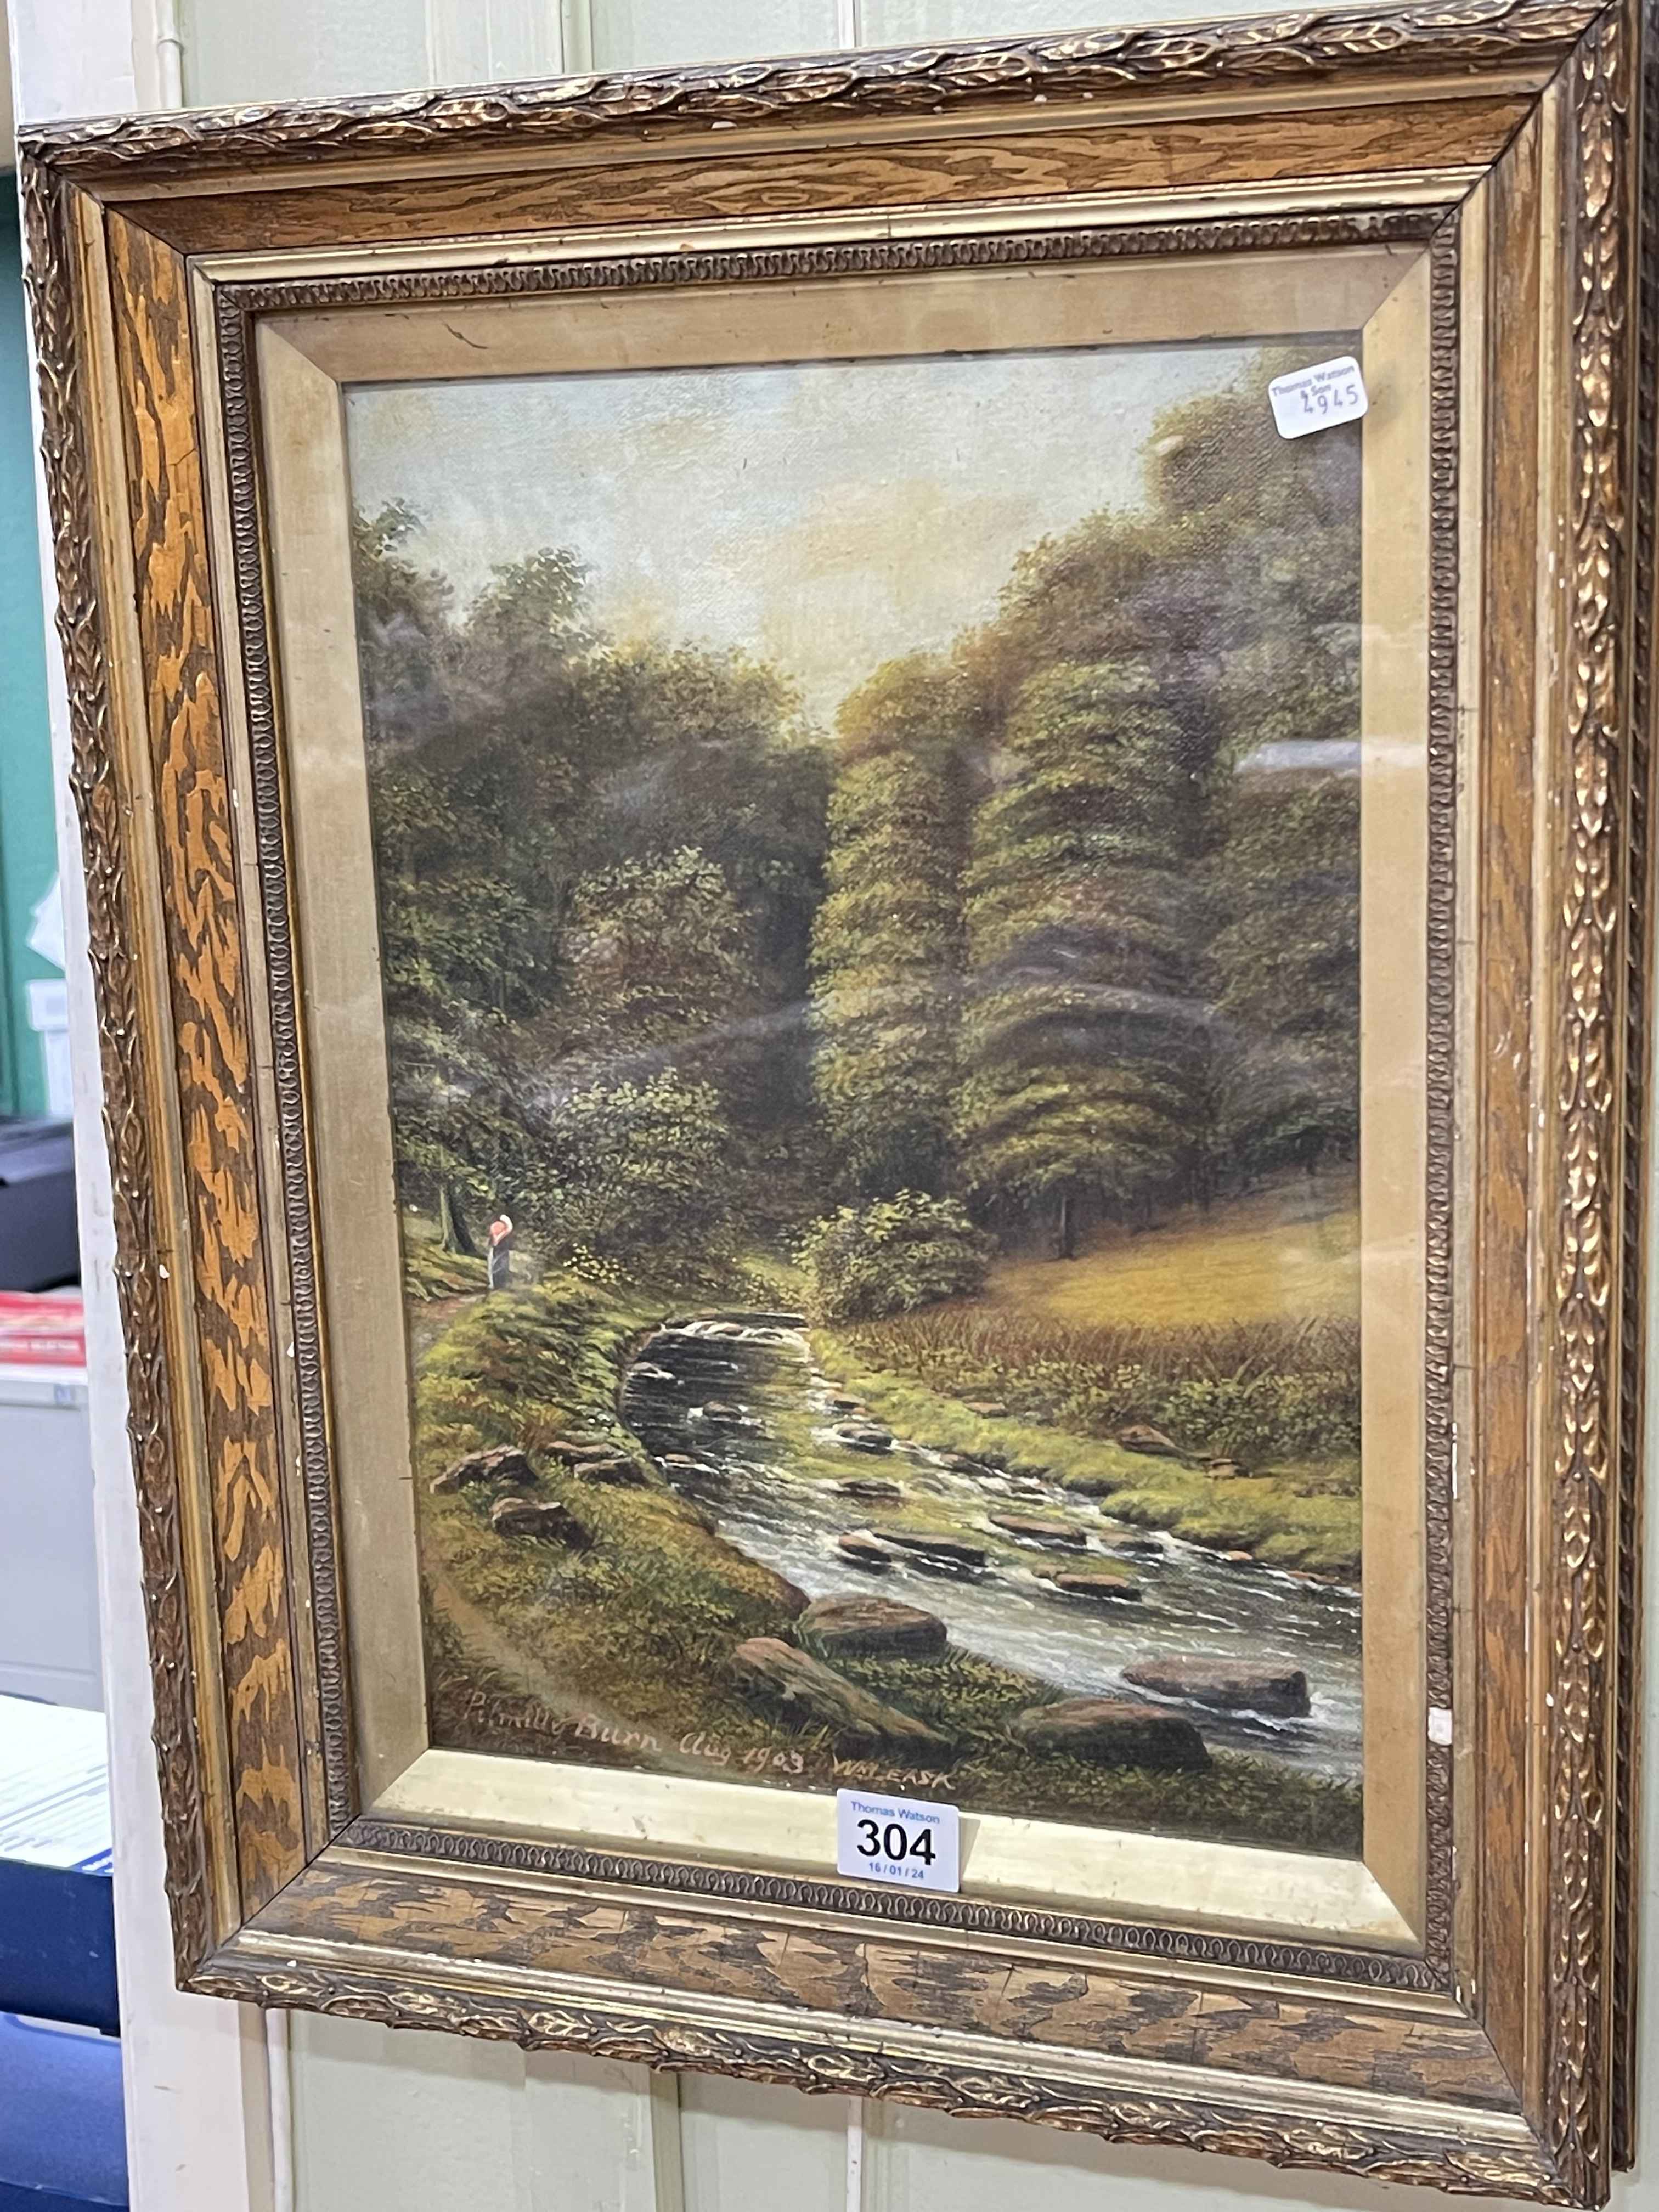 Wm Leask, Pilmilly Burn, oil on board, signed, titled and dated Aug 1903, 34cm by 24cm,